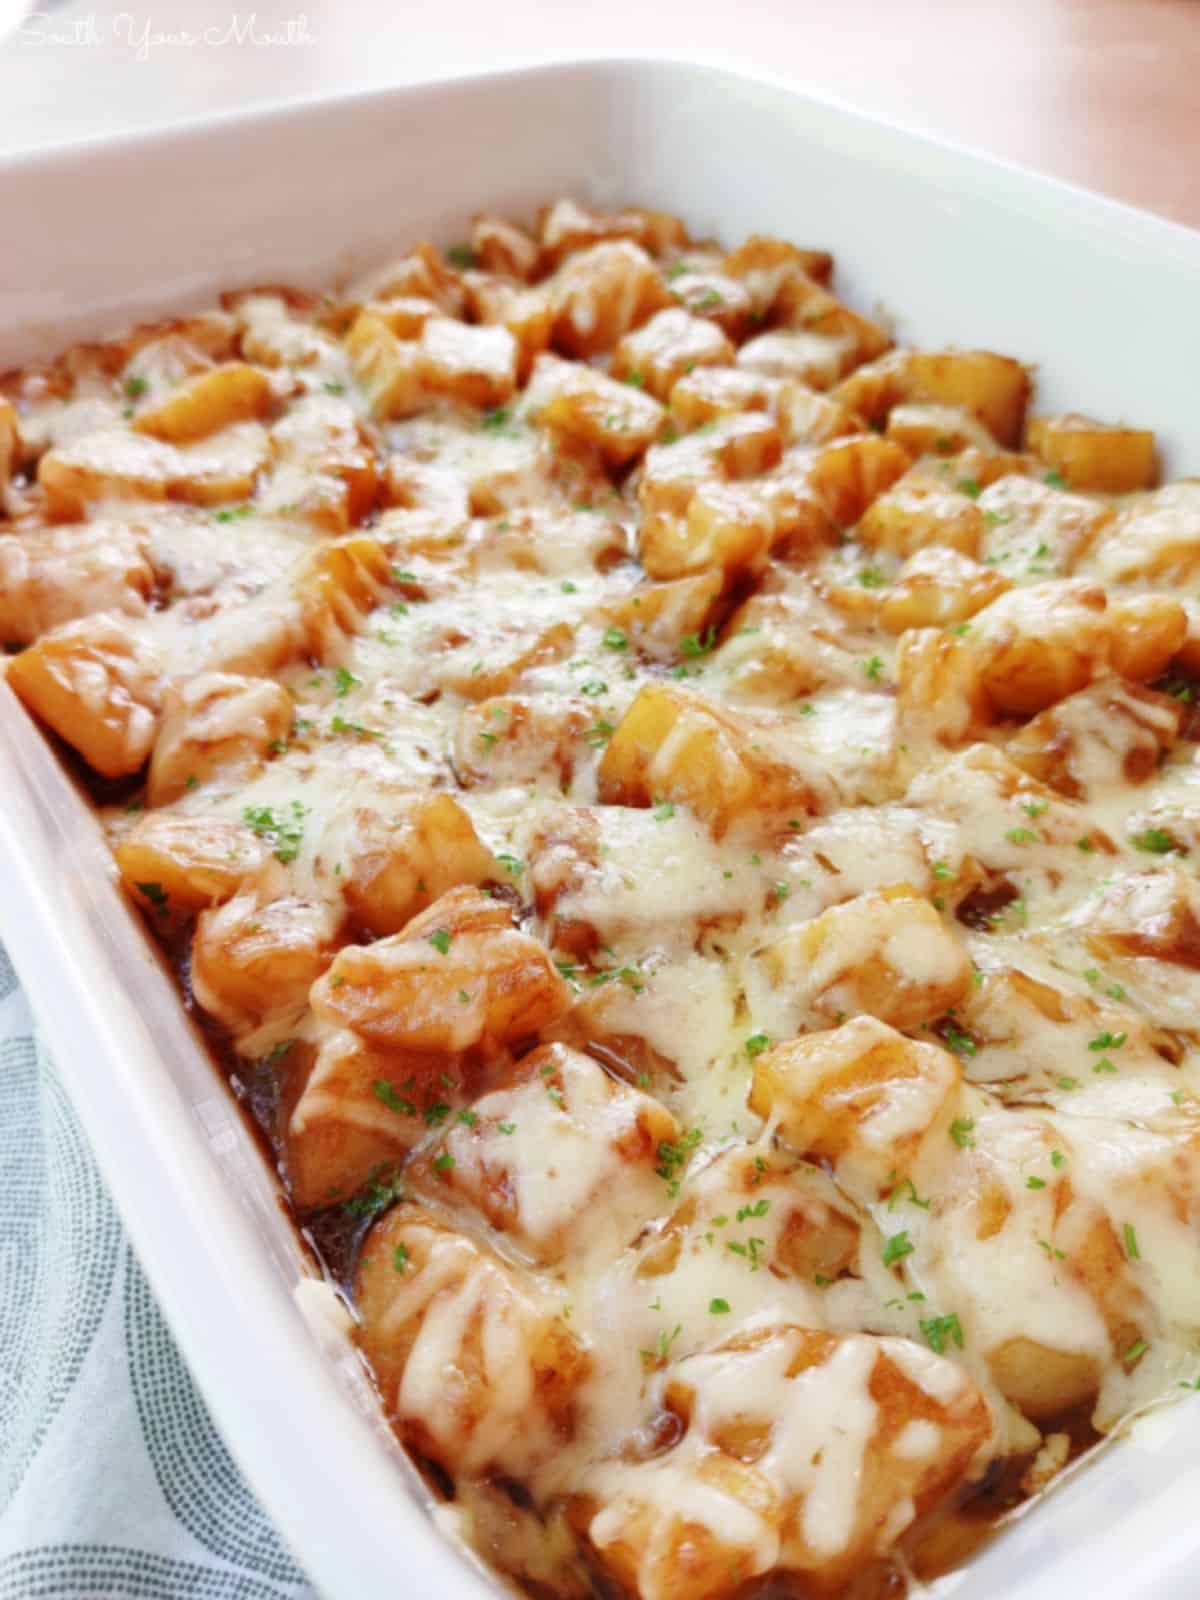 French onion potatoes in a white casserole.